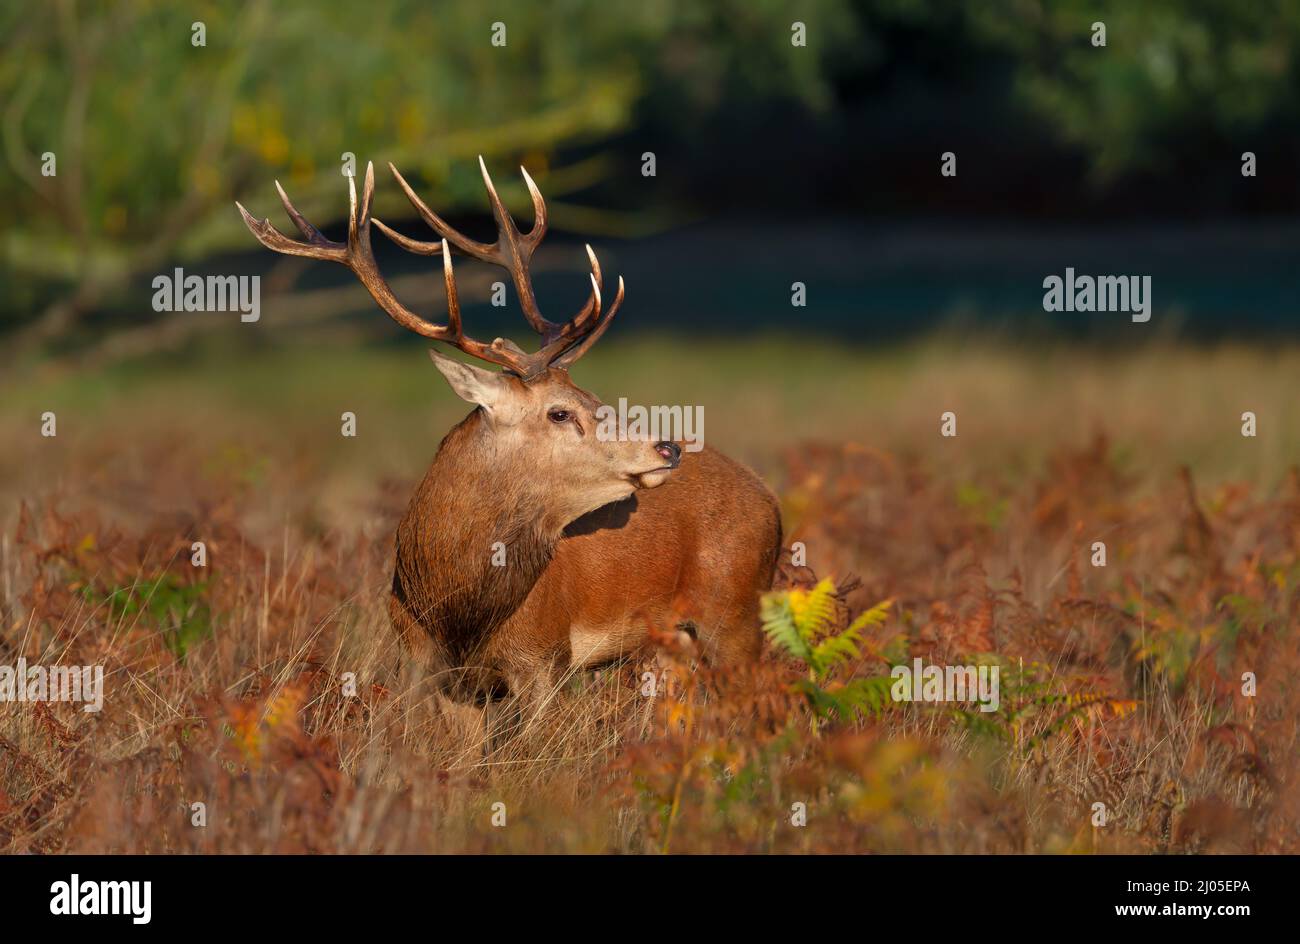 Close up of a red deer stag standing in a field of grass in autumn, UK. Stock Photo